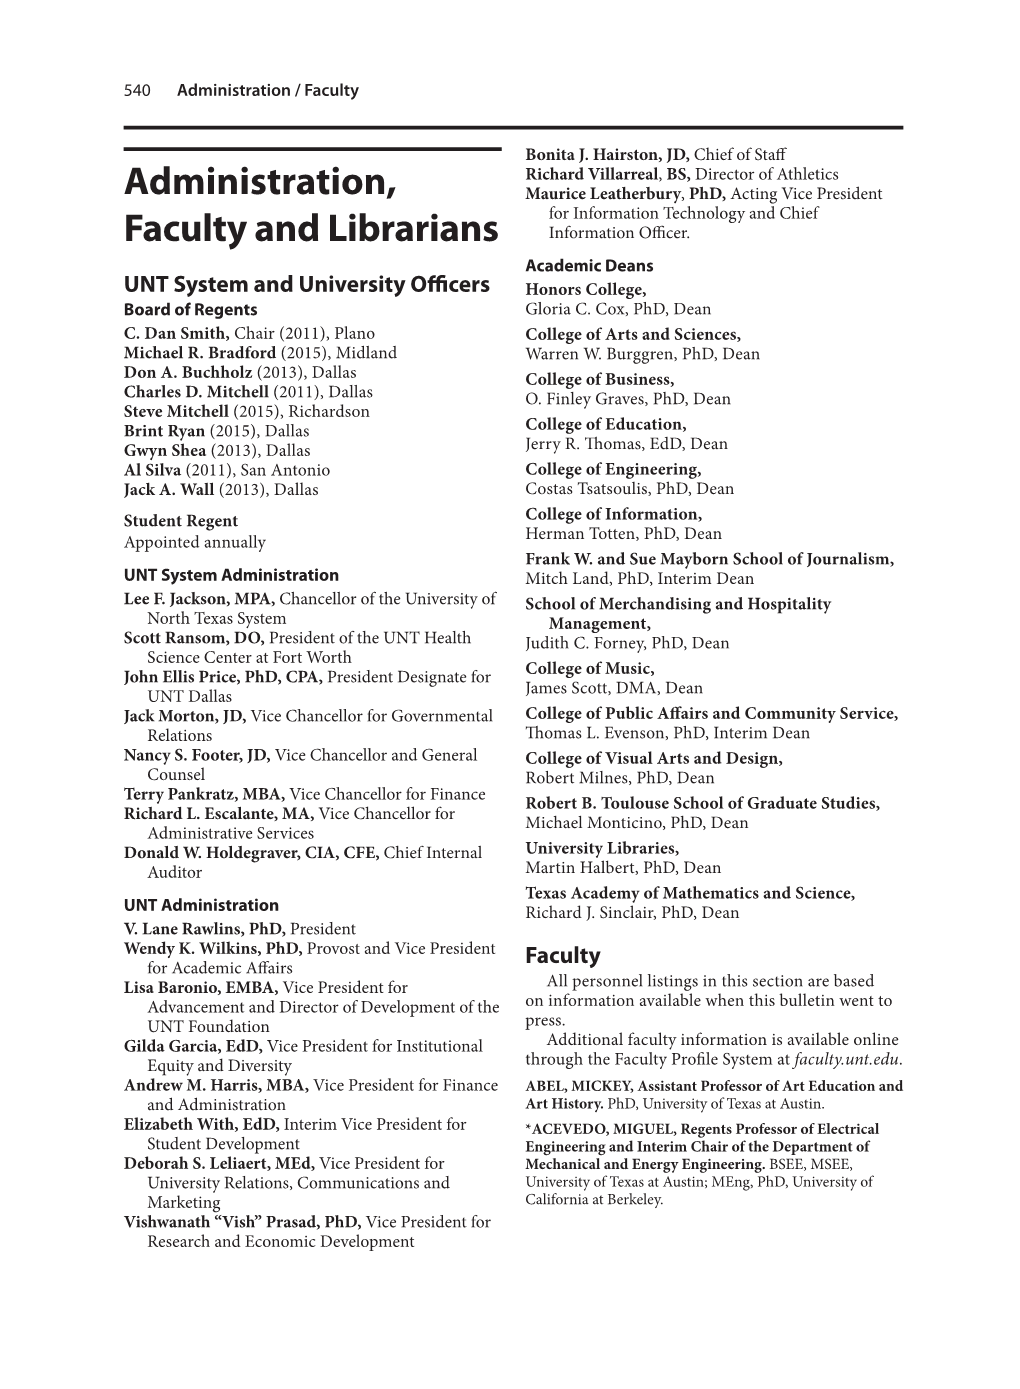 Administration, Faculty and Librarians